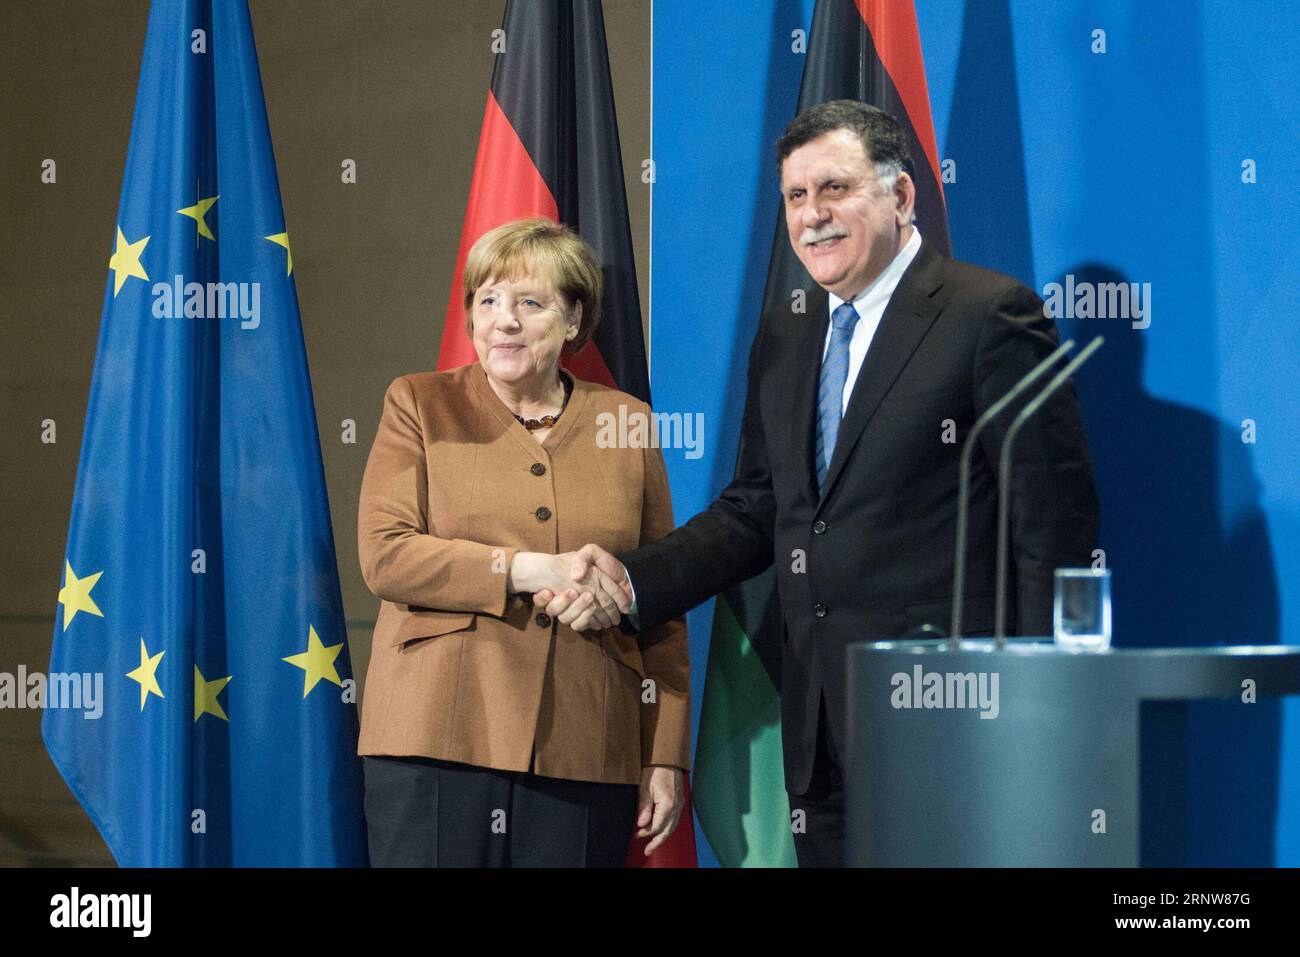 171207 -- BERLIN, Dec. 7, 2017 -- German Chancellor Angela Merkel L shakes hands with visiting Libyan UN-backed Prime Minister Fayez al-Sarraj at a press conference in Berlin, Germany, on Dec. 7, 2017. Merkel, after talks with Fayez al-Sarraj on Thursday, urged the Libyan authorities to improve the conditions of migrants in the North African country and pledged more support from the European Union.  GERMANY-BERLIN-CHANCELLOR-LIBYA-UN-BACKED PM-MEETING ZhangxYuan PUBLICATIONxNOTxINxCHN Stock Photo